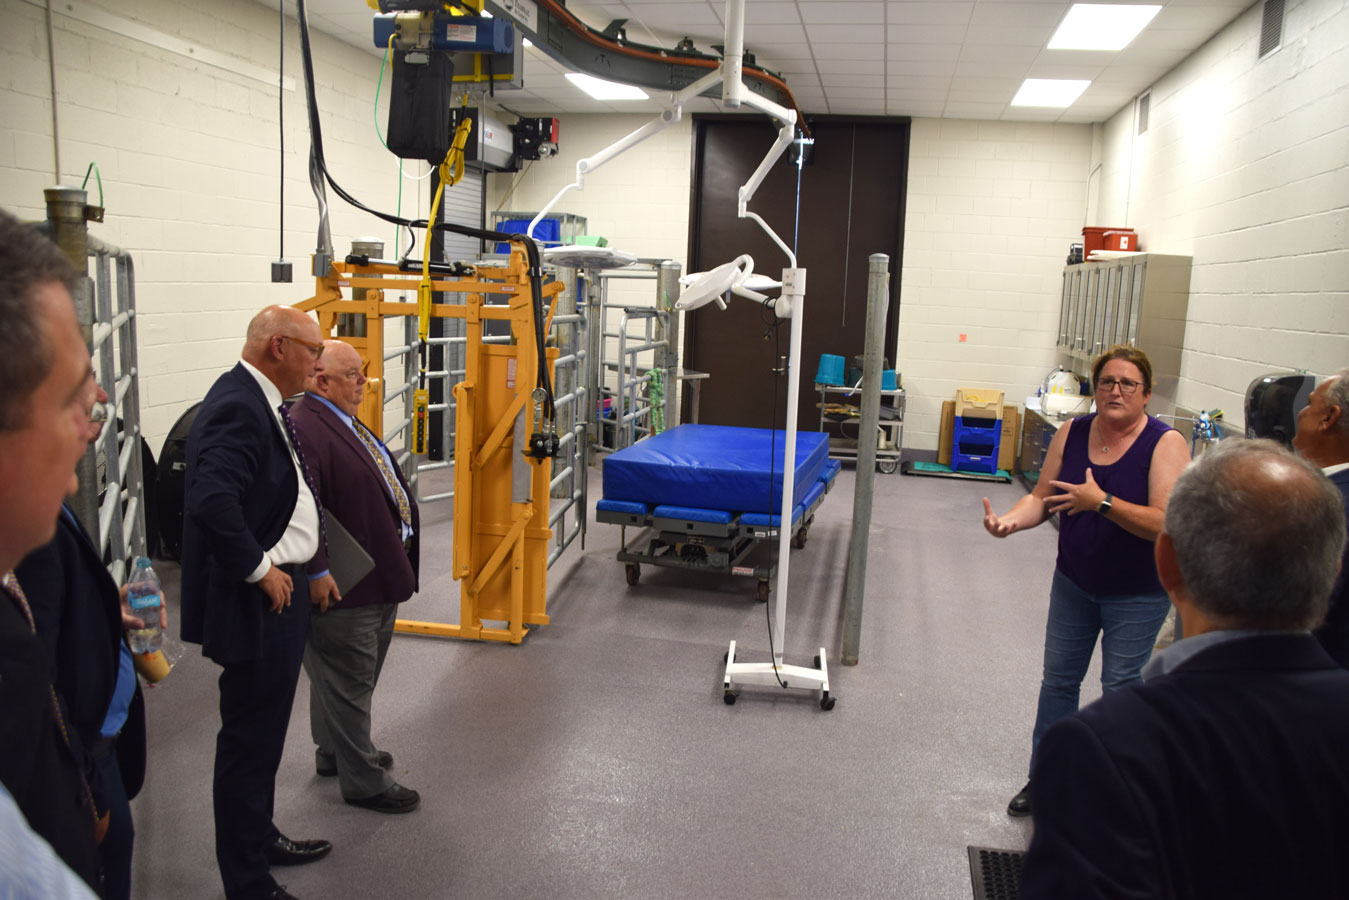 Dr. Scully showing visitors the new space